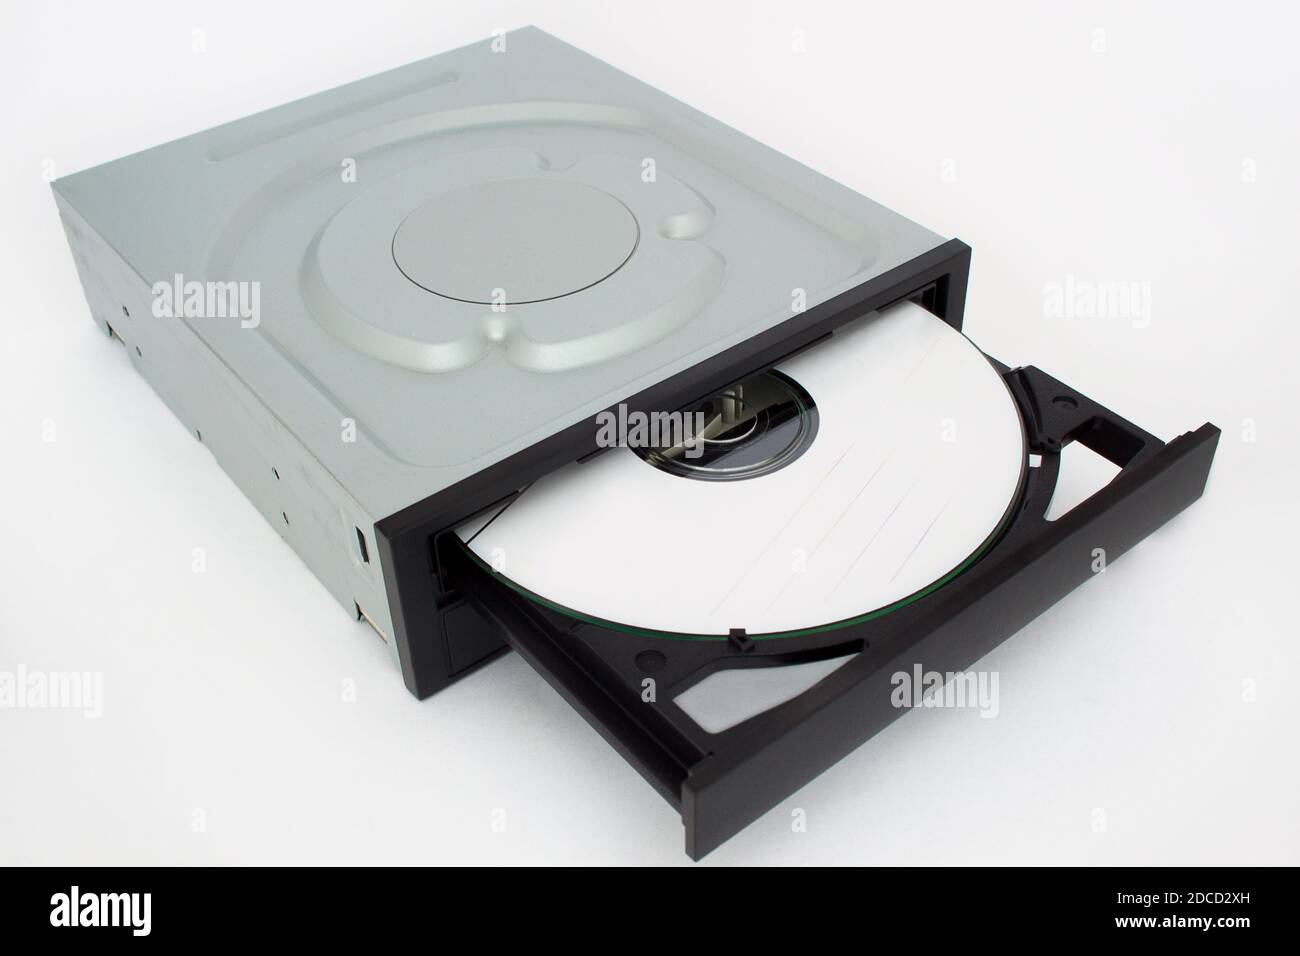 Cd Rom Drive High Resolution Stock Photography and Images - Alamy